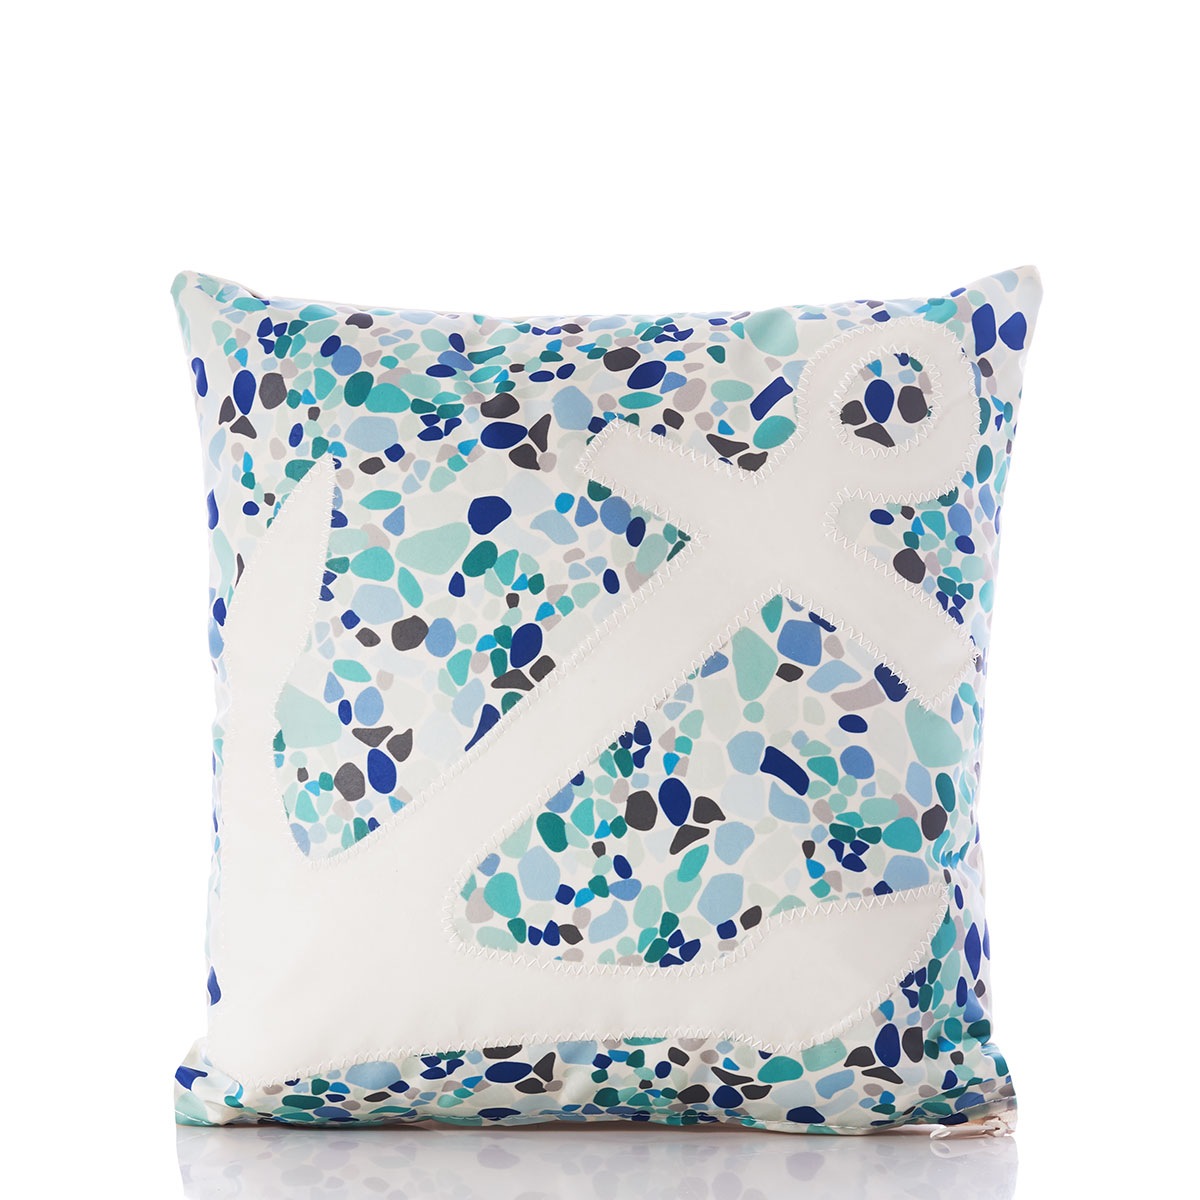 a white anchor sits on the front of a recycled sail cloth pillow covered in a sea glass print of varied blues